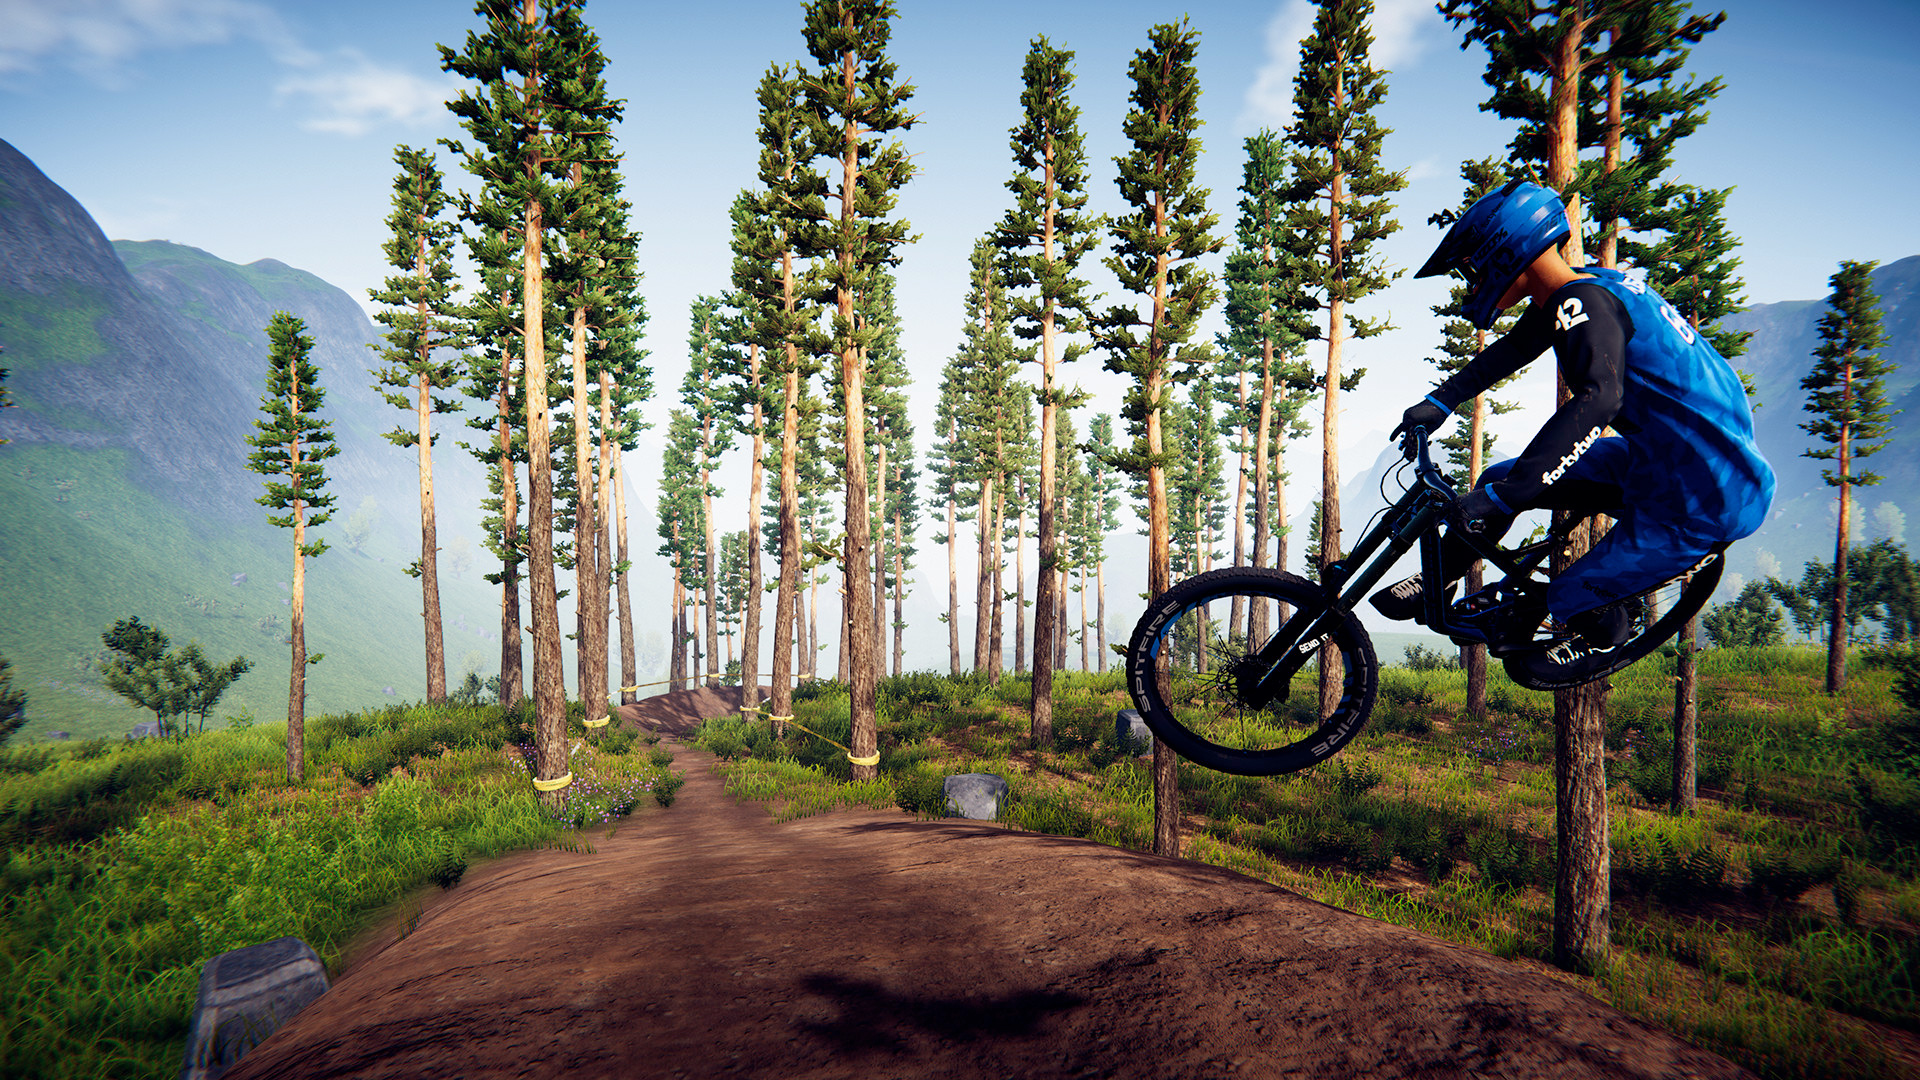 A cyclist performing a trick mid-air in Descenders